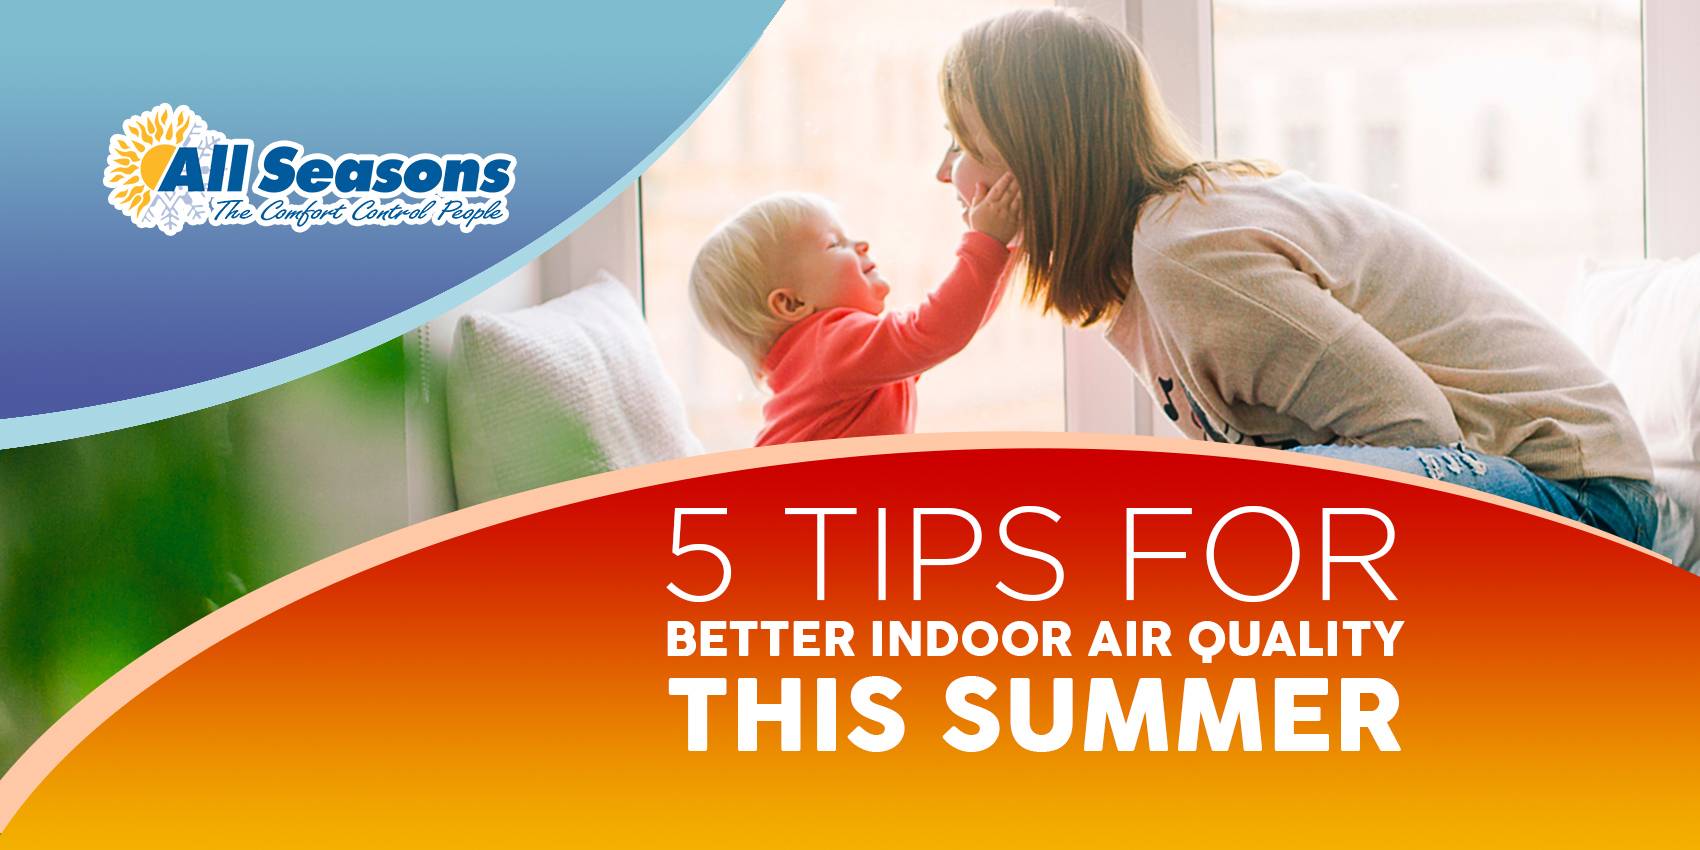 5 Tips for Better Indoor Air Quality This Summer